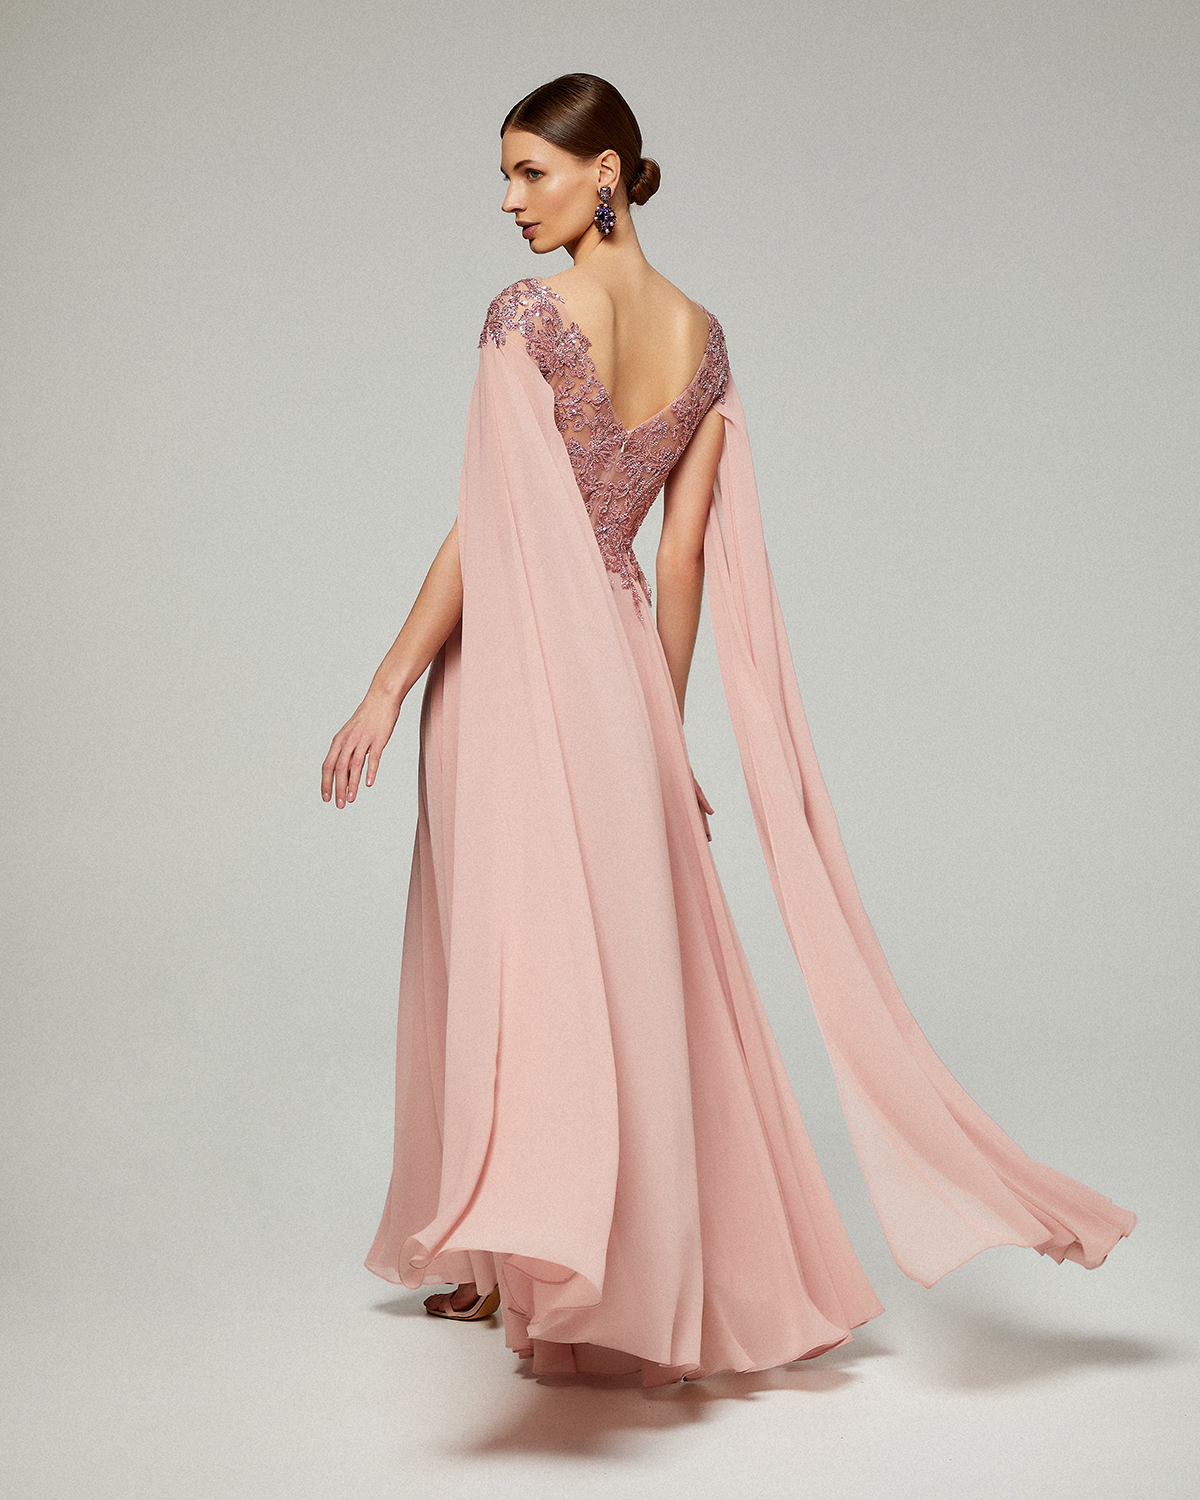 Long  chiffon dress with fully beaded lace top and long sleeves